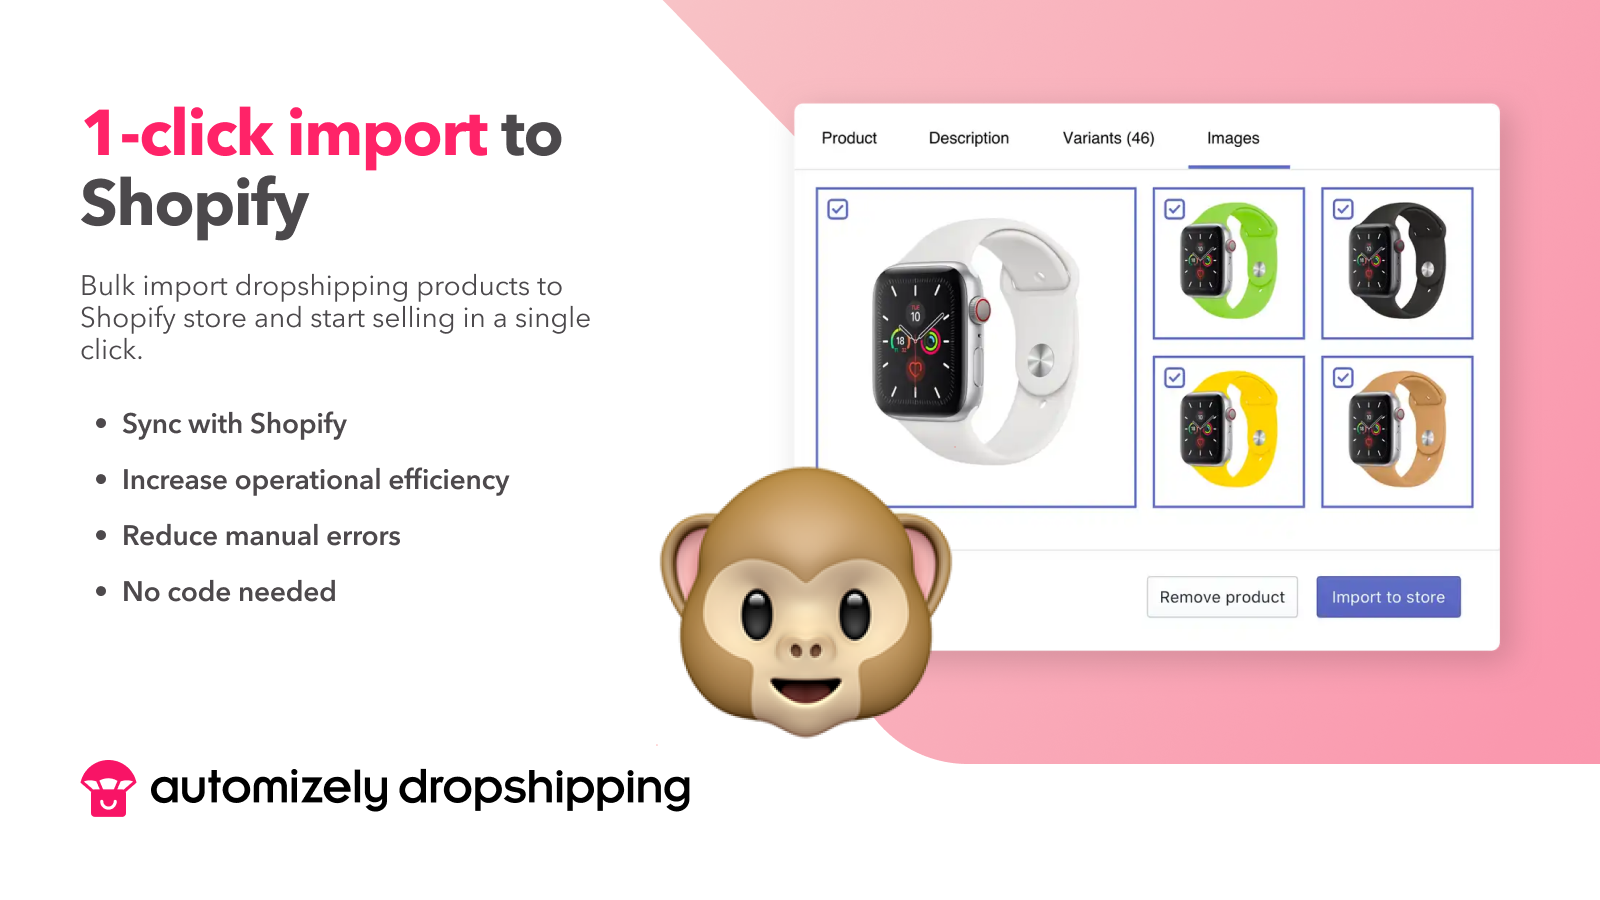 Bulk-import dropshipping products to Shopify in a click 